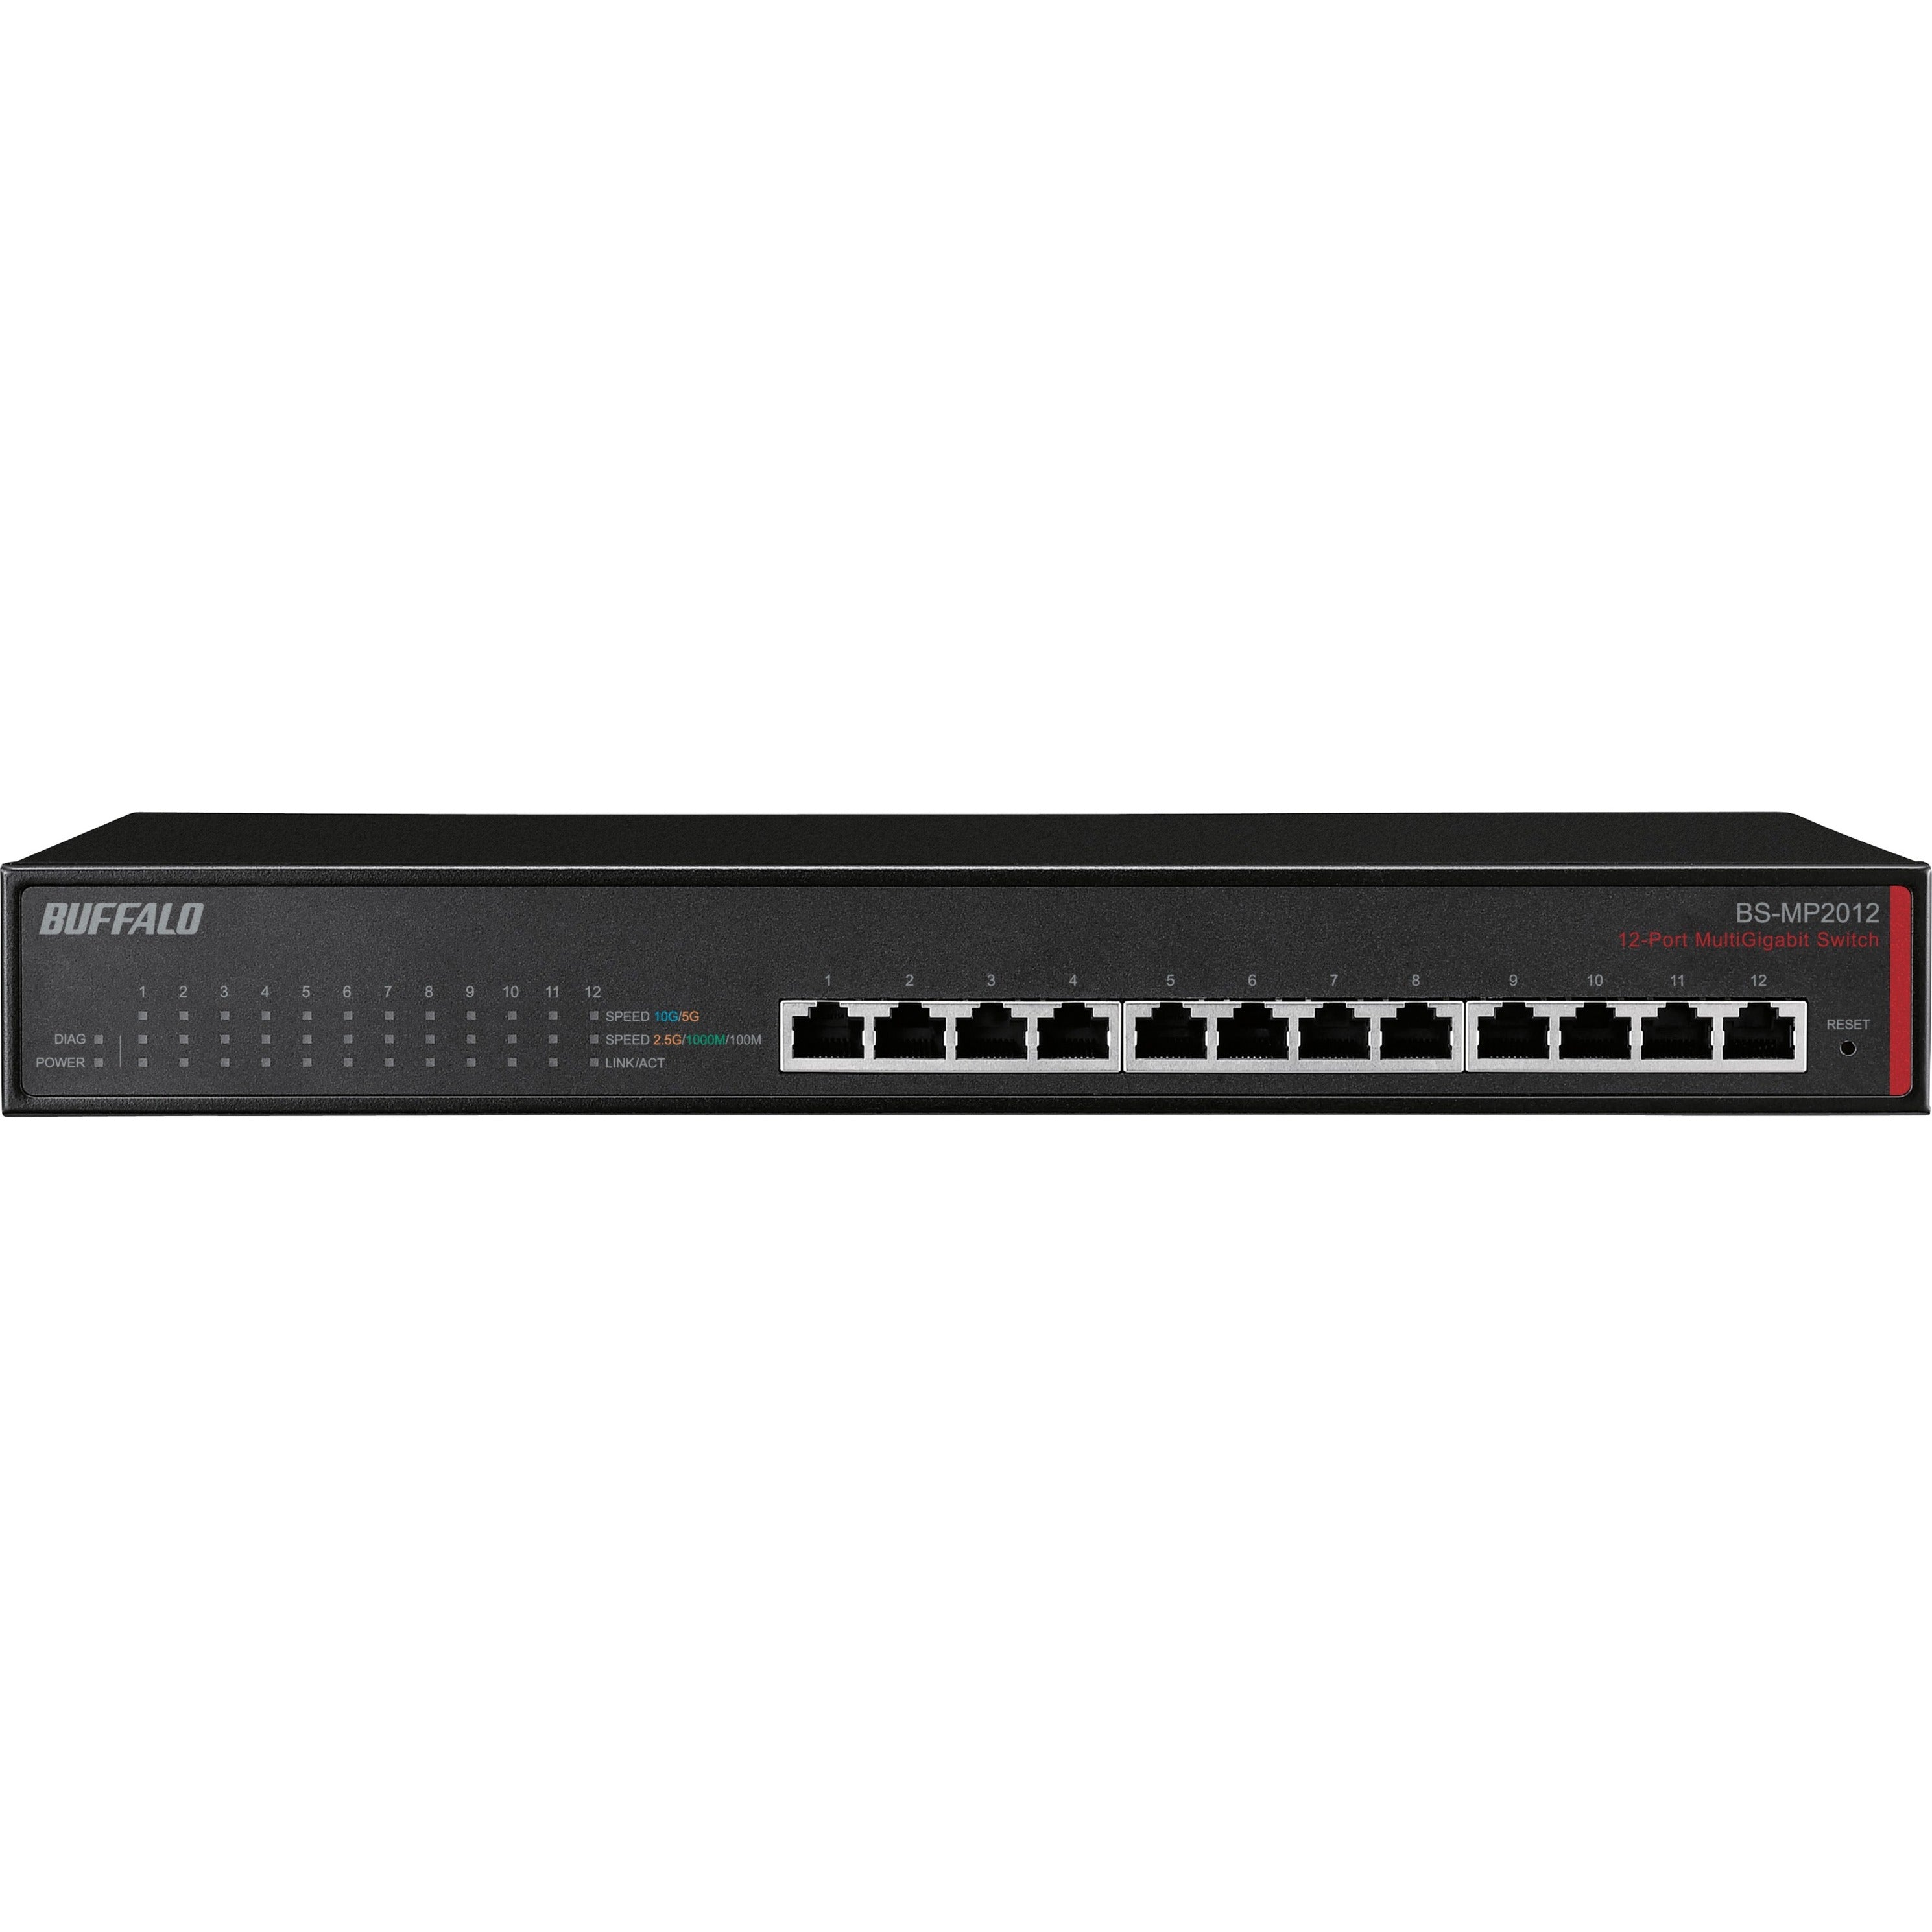 Buffalo BS-MP2012 12-Port 10 Gigabit Switch, High-Speed Ethernet Networking Solution